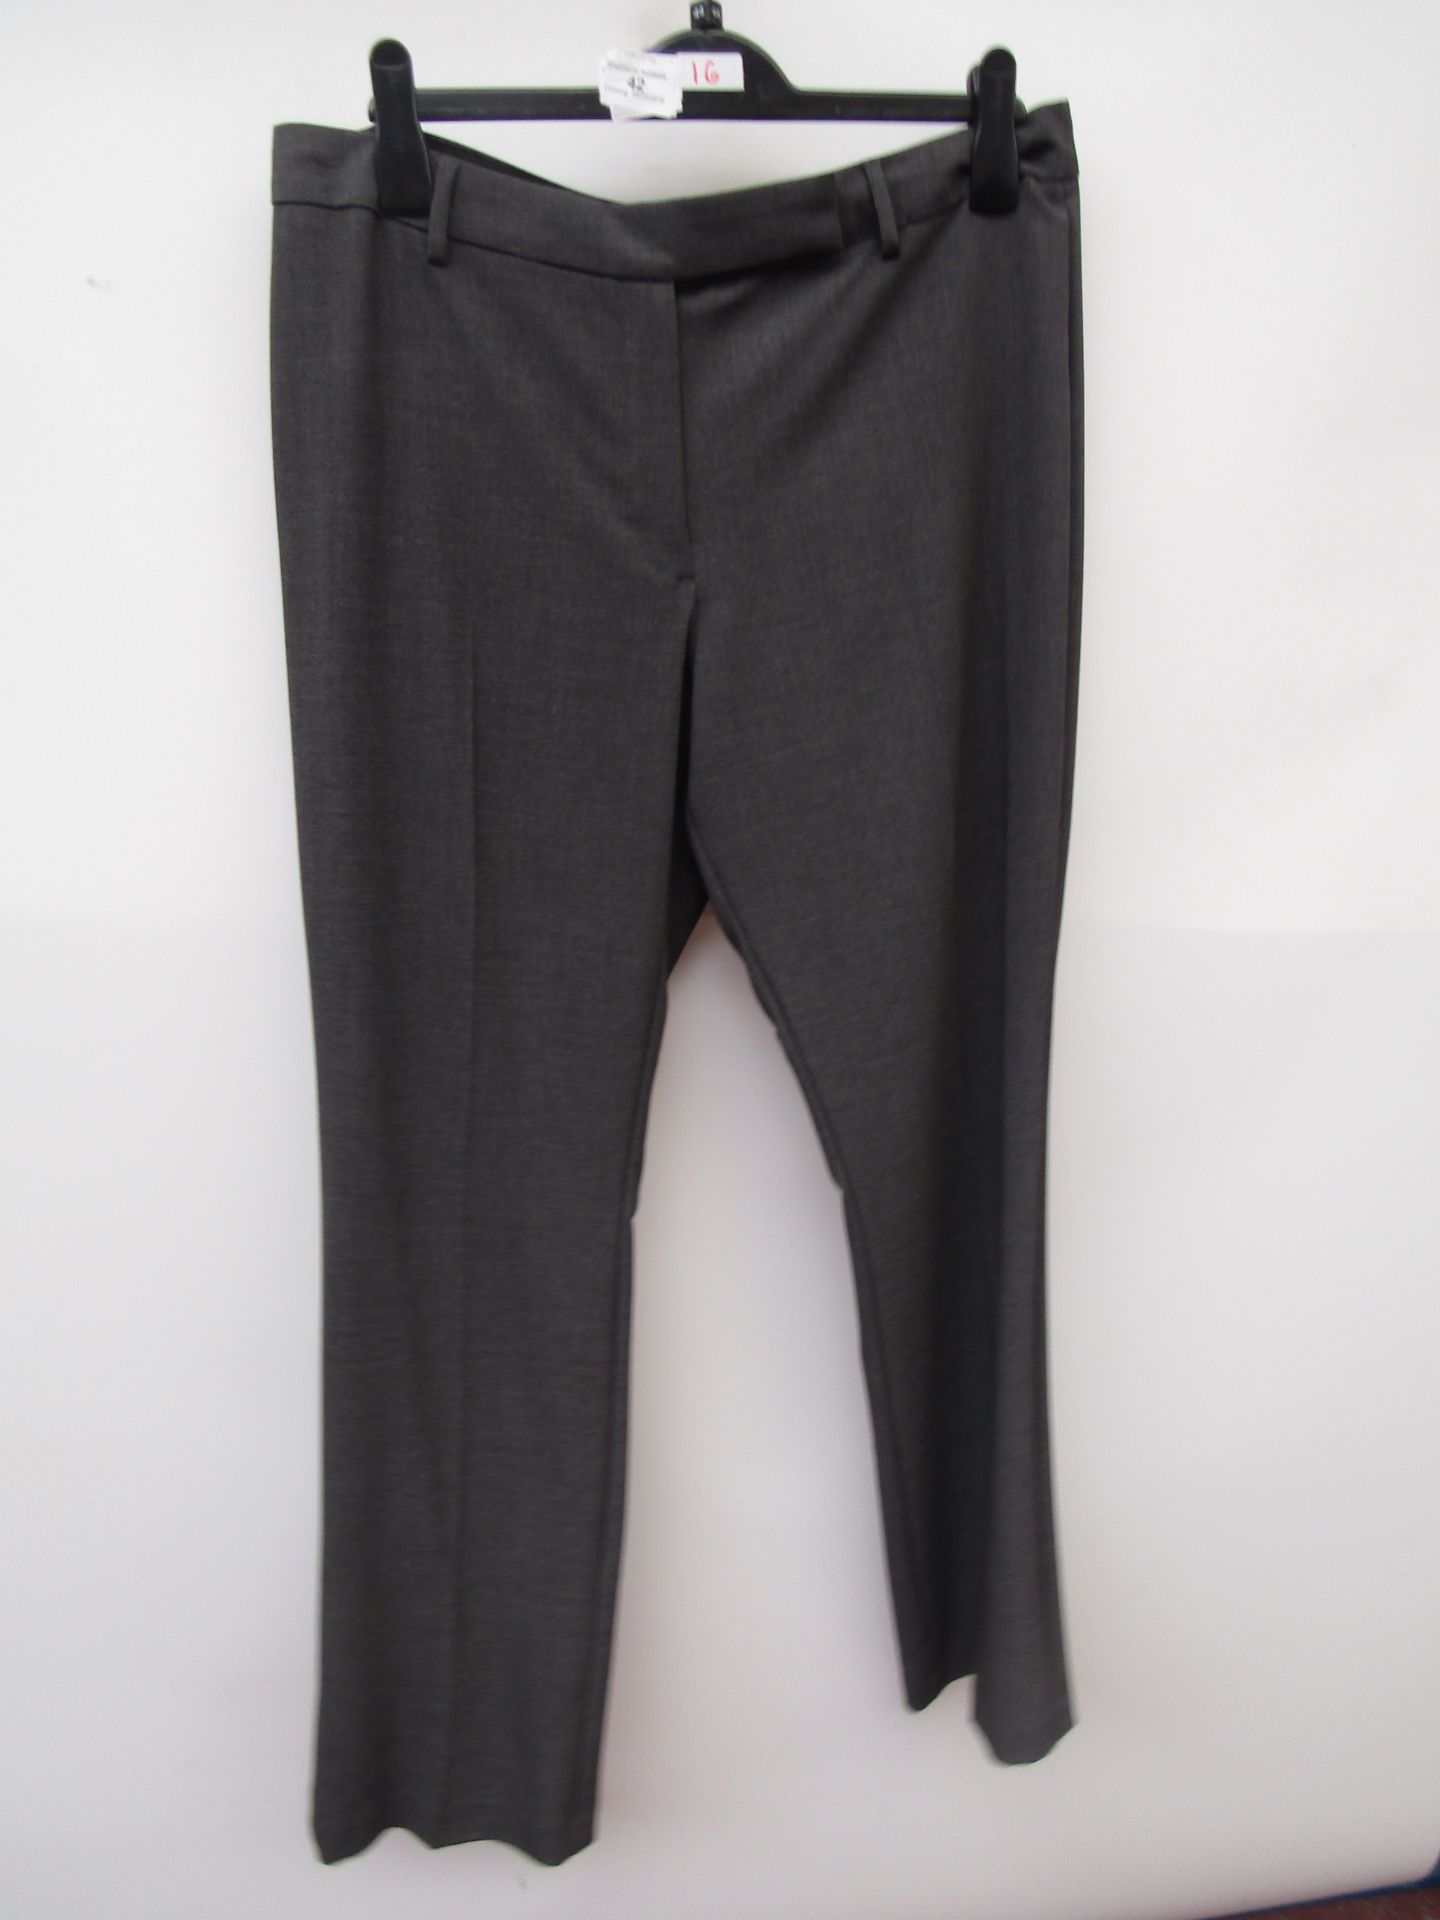 M&S Collection Ladies Bootleg Trousers Size 16, please read Lot Zero Before Bidding